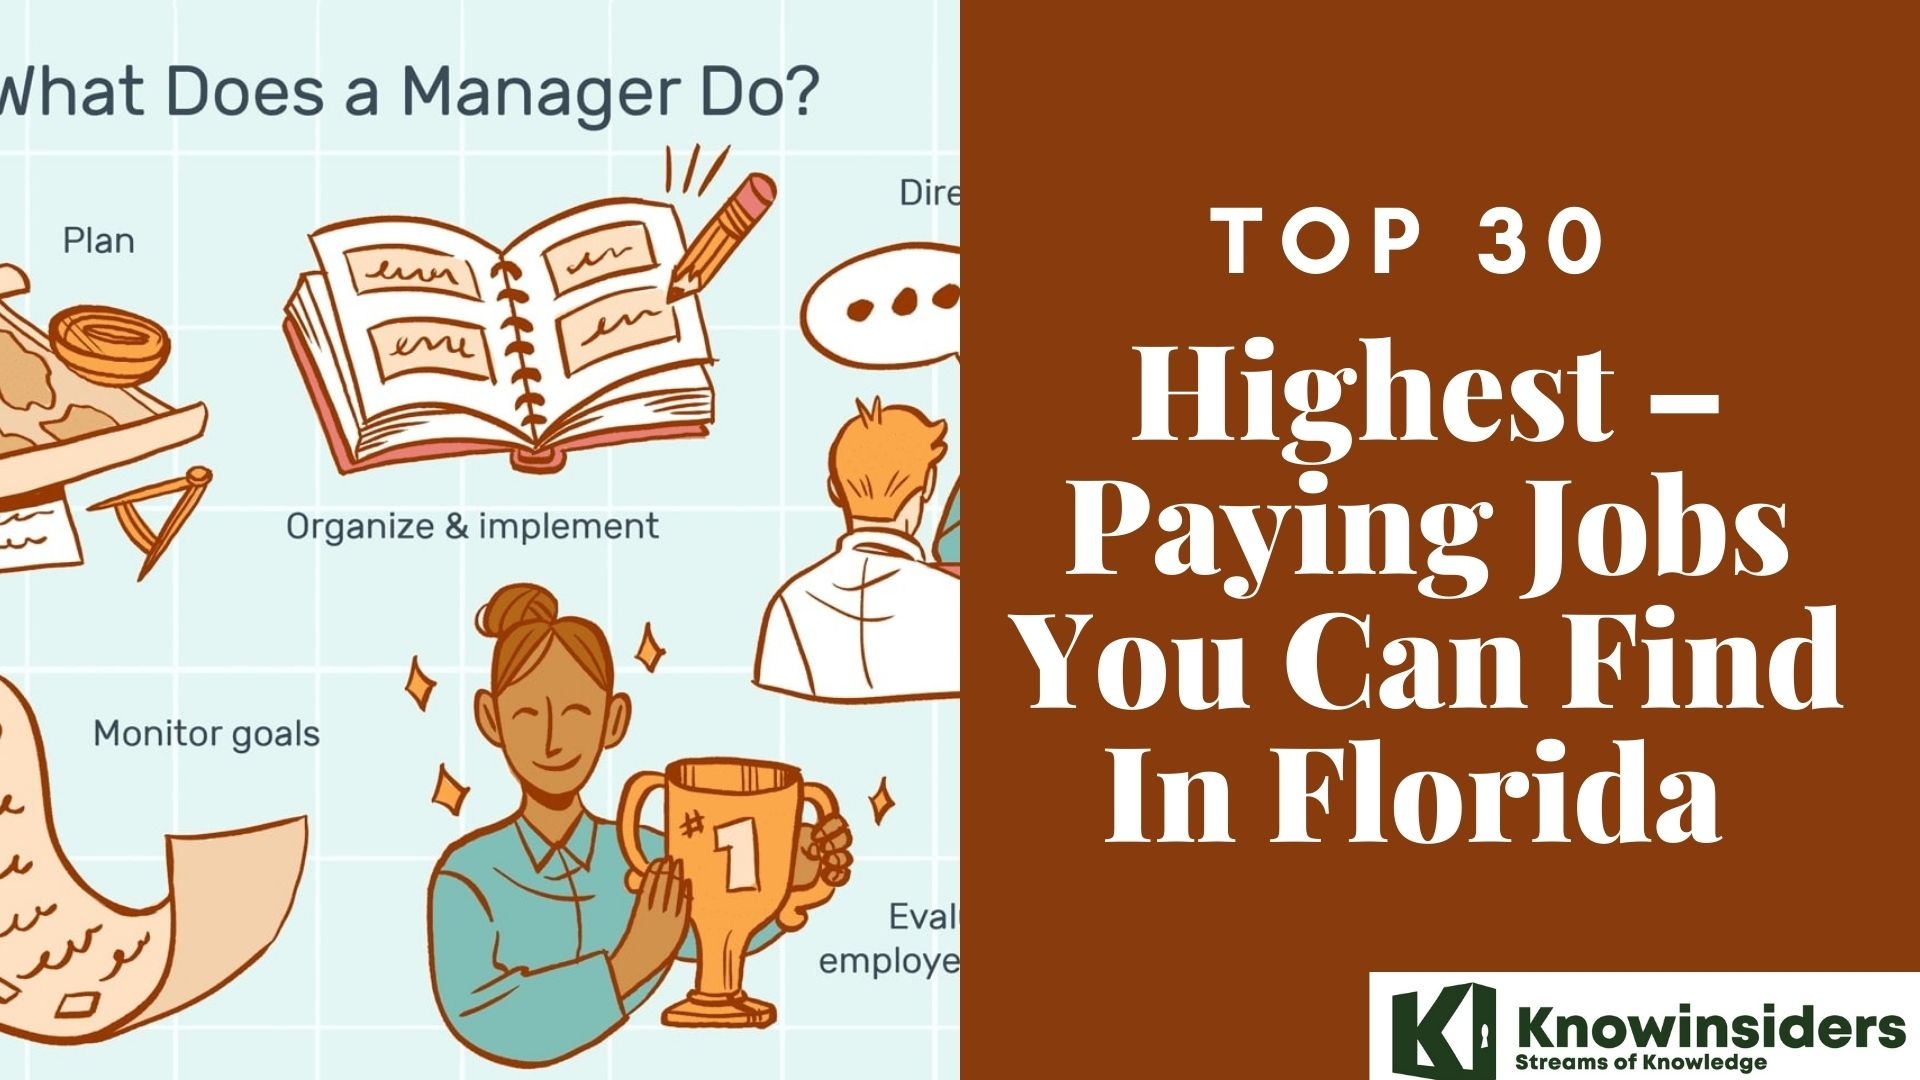 Top 30 Highest Paying Jobs You Can Find In Florida